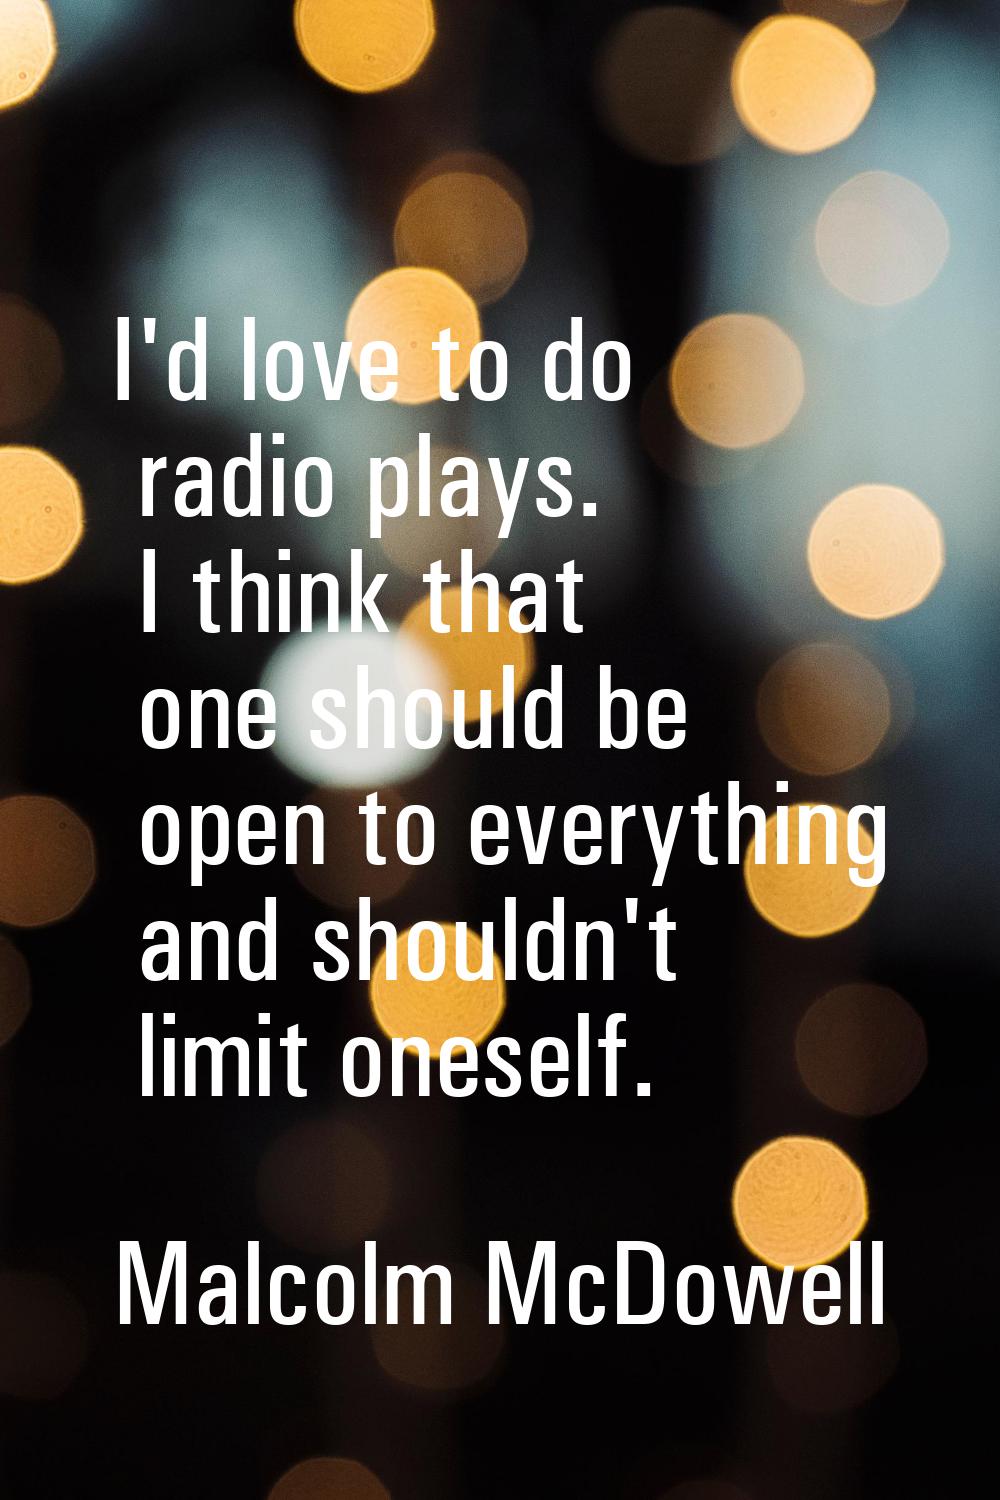 I'd love to do radio plays. I think that one should be open to everything and shouldn't limit onese